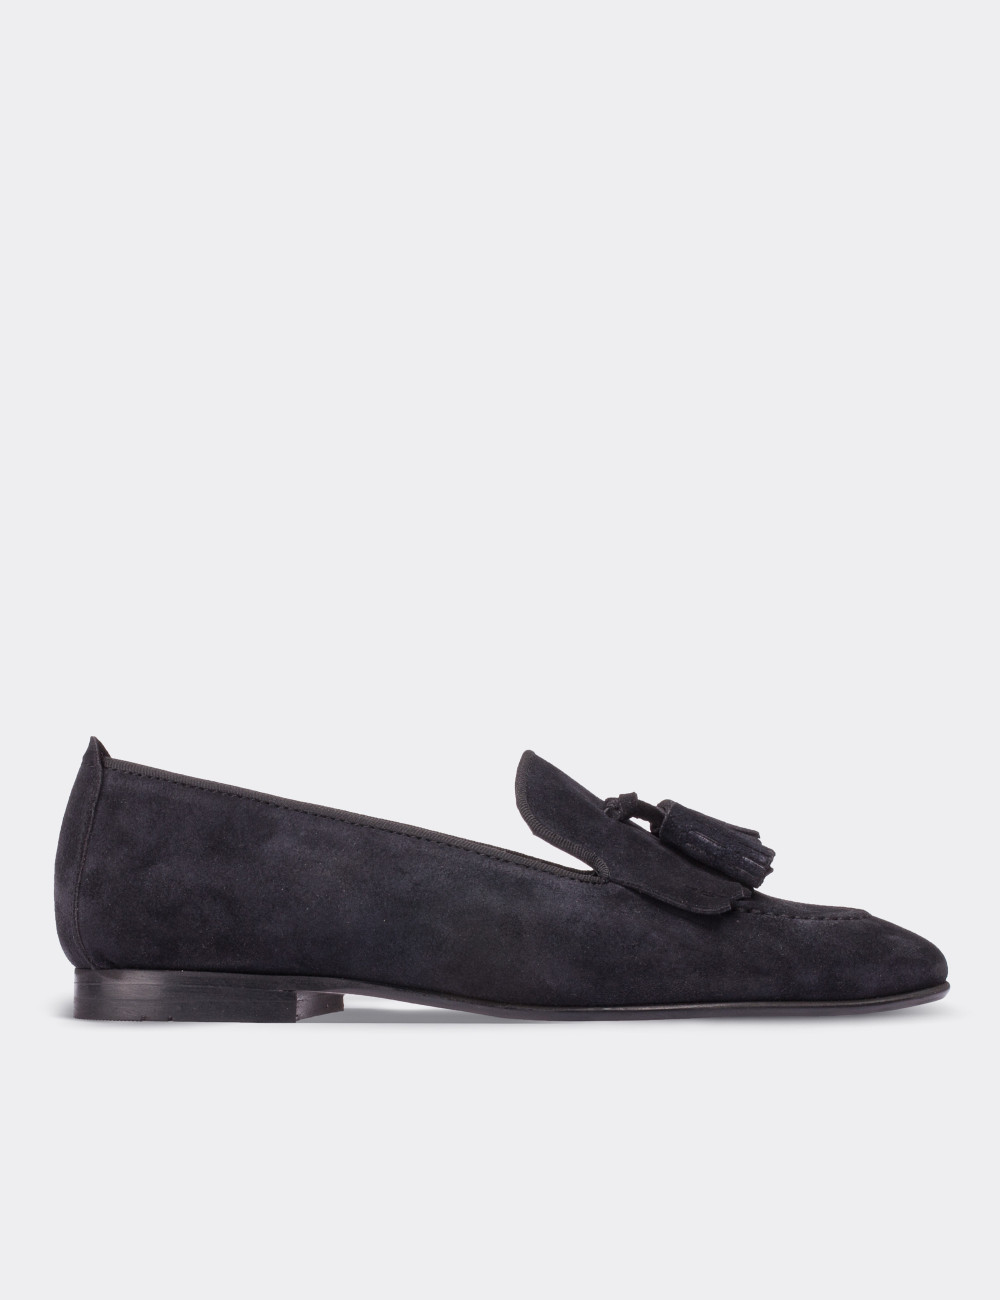 Navy Suede Leather Loafers - 01618ZLCVM01